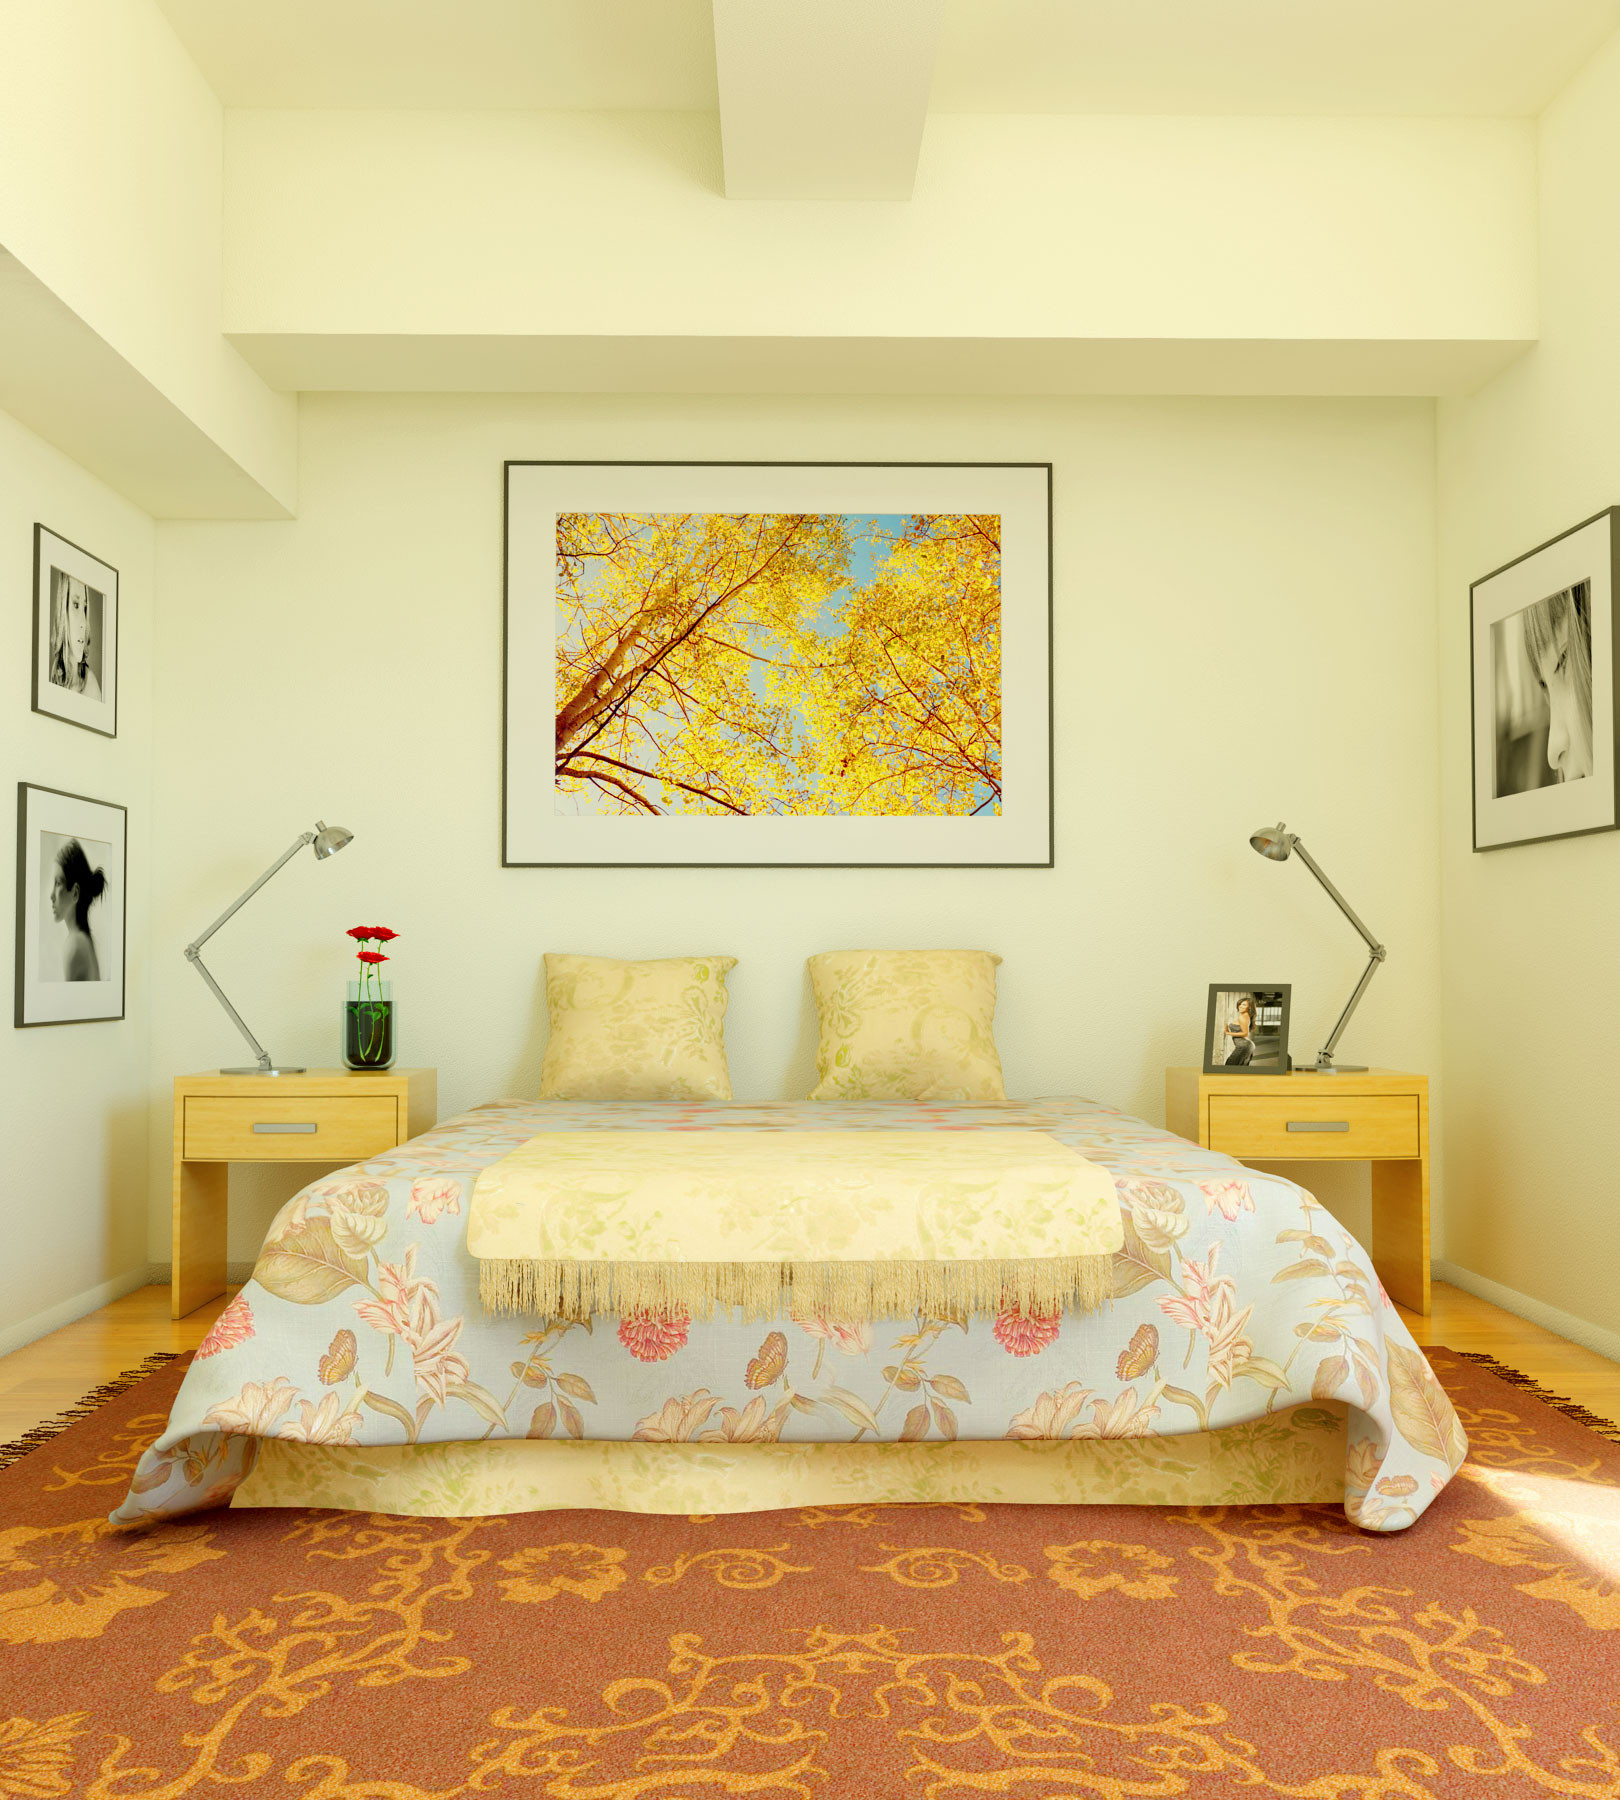 Bedroom Wall Painting
 Best Paint Colors for Small Room – Some Tips – HomesFeed